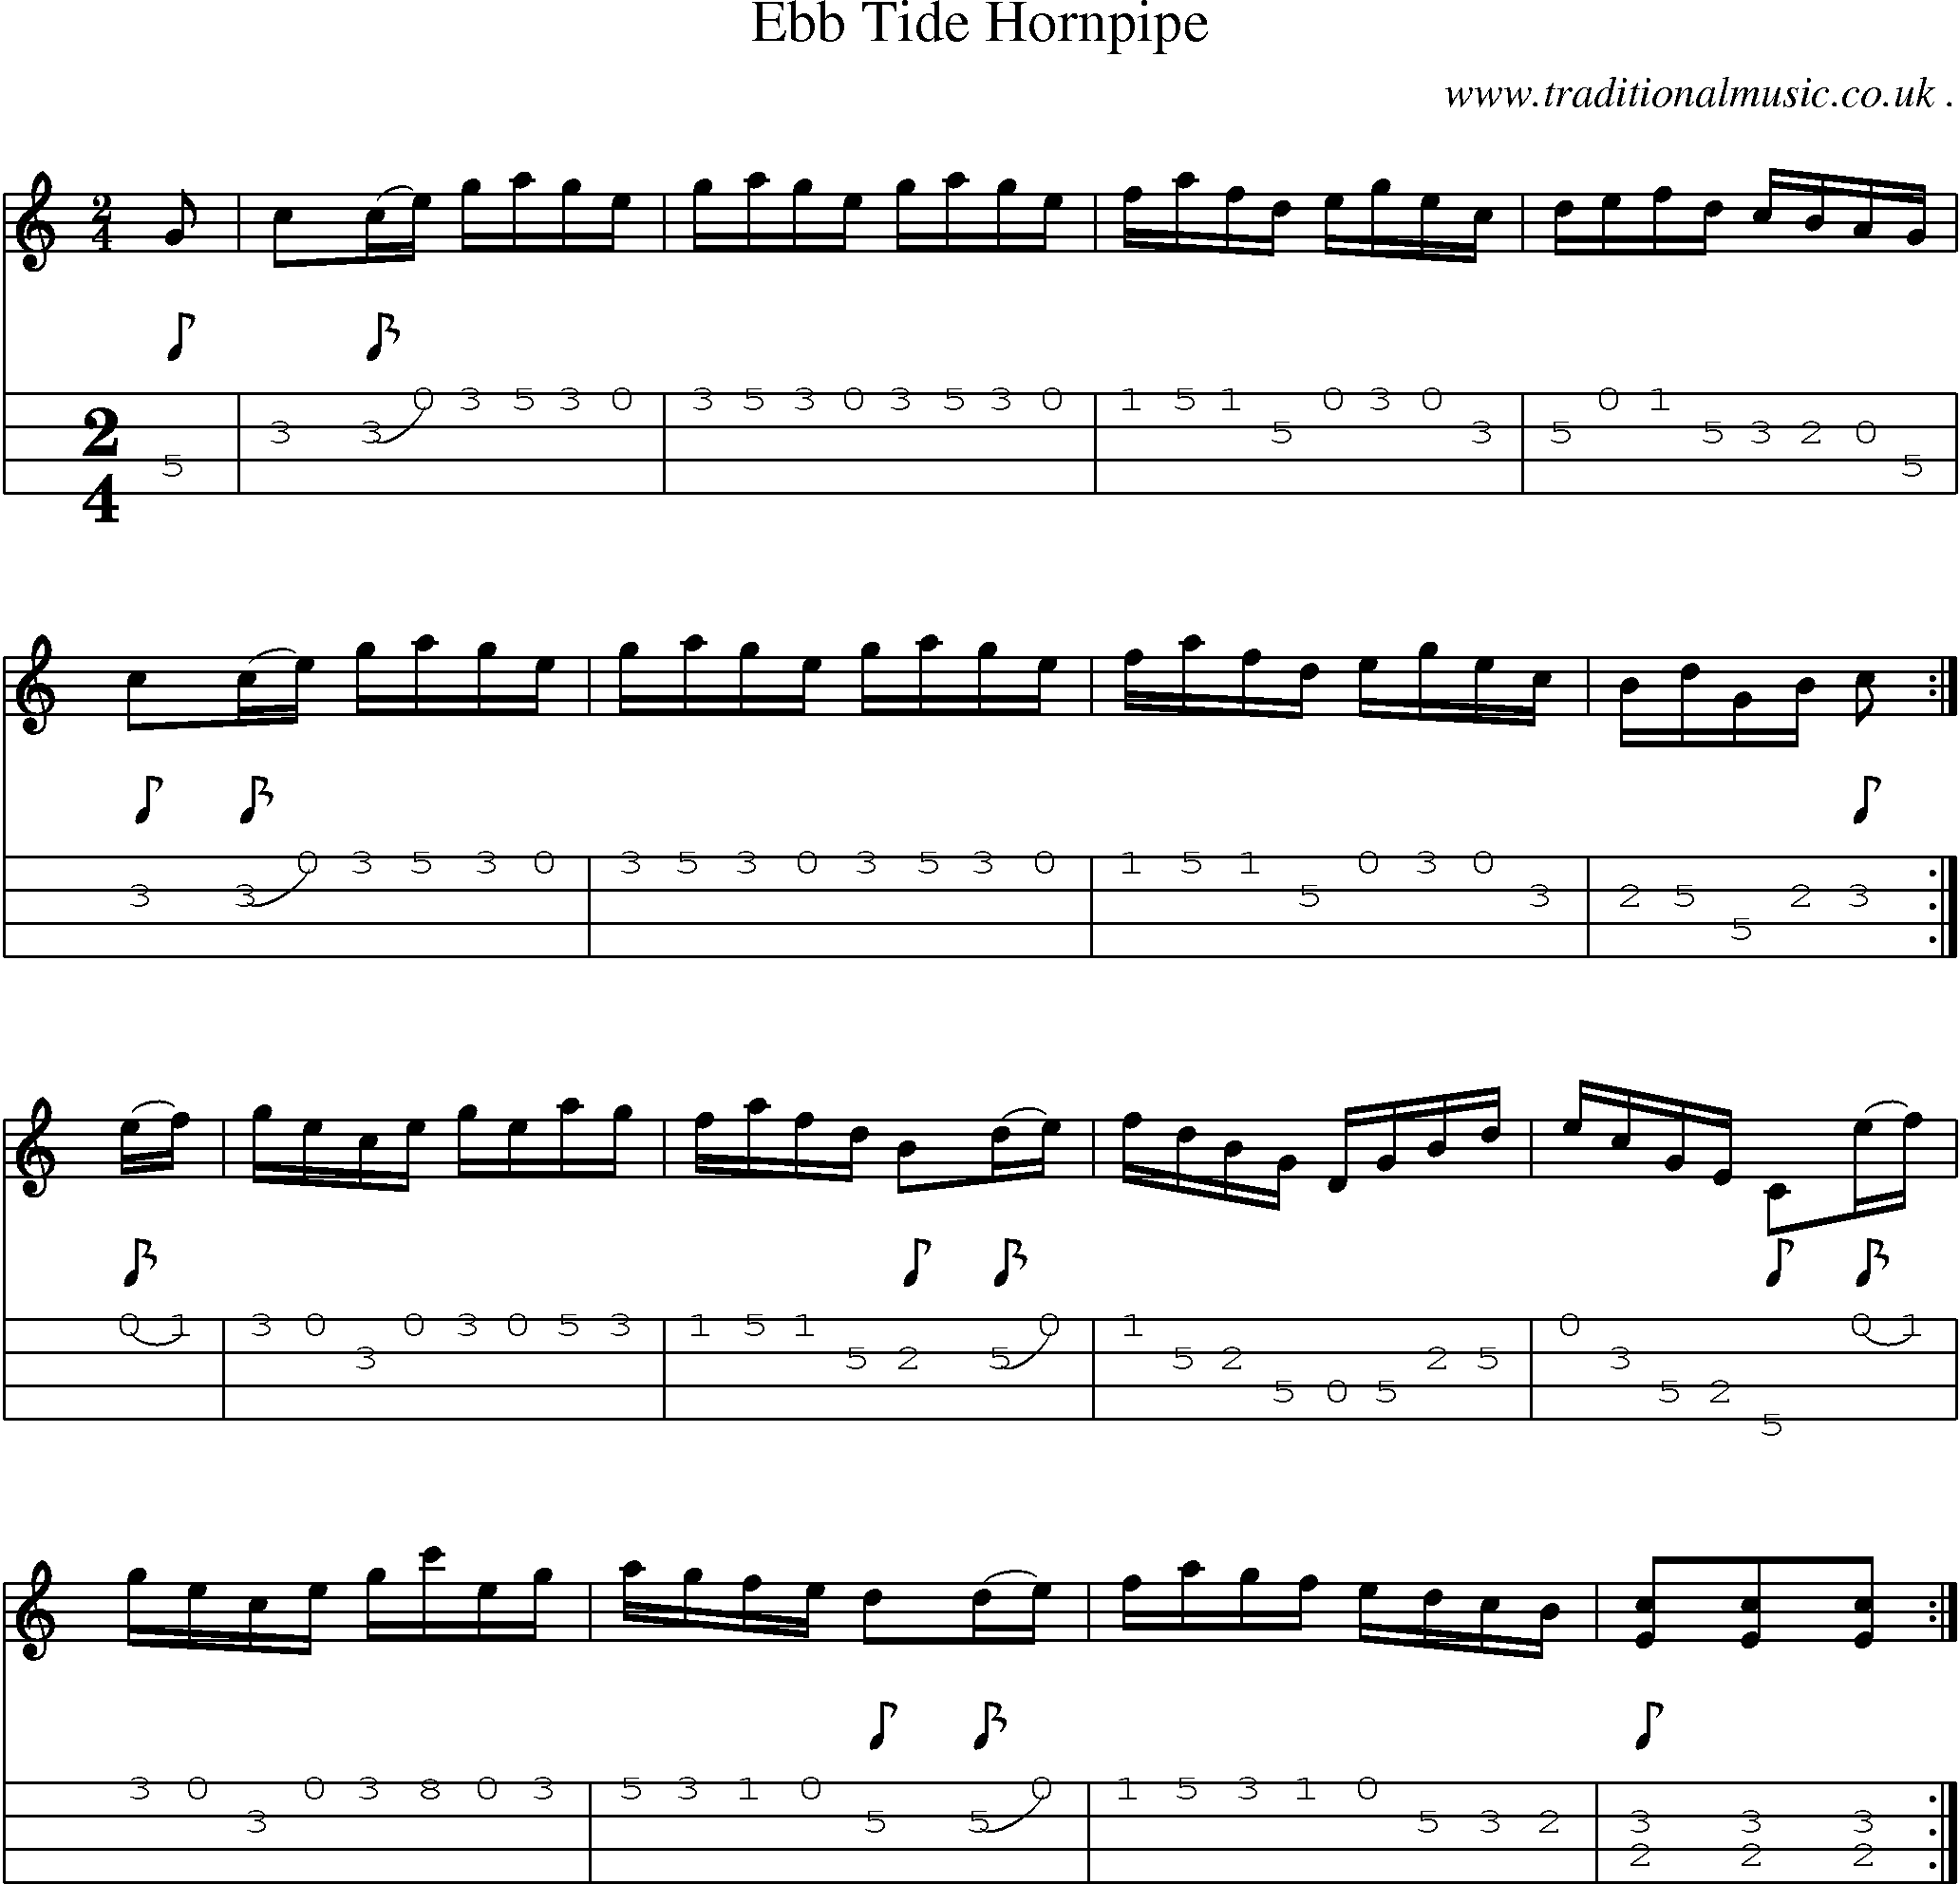 Sheet-Music and Mandolin Tabs for Ebb Tide Hornpipe